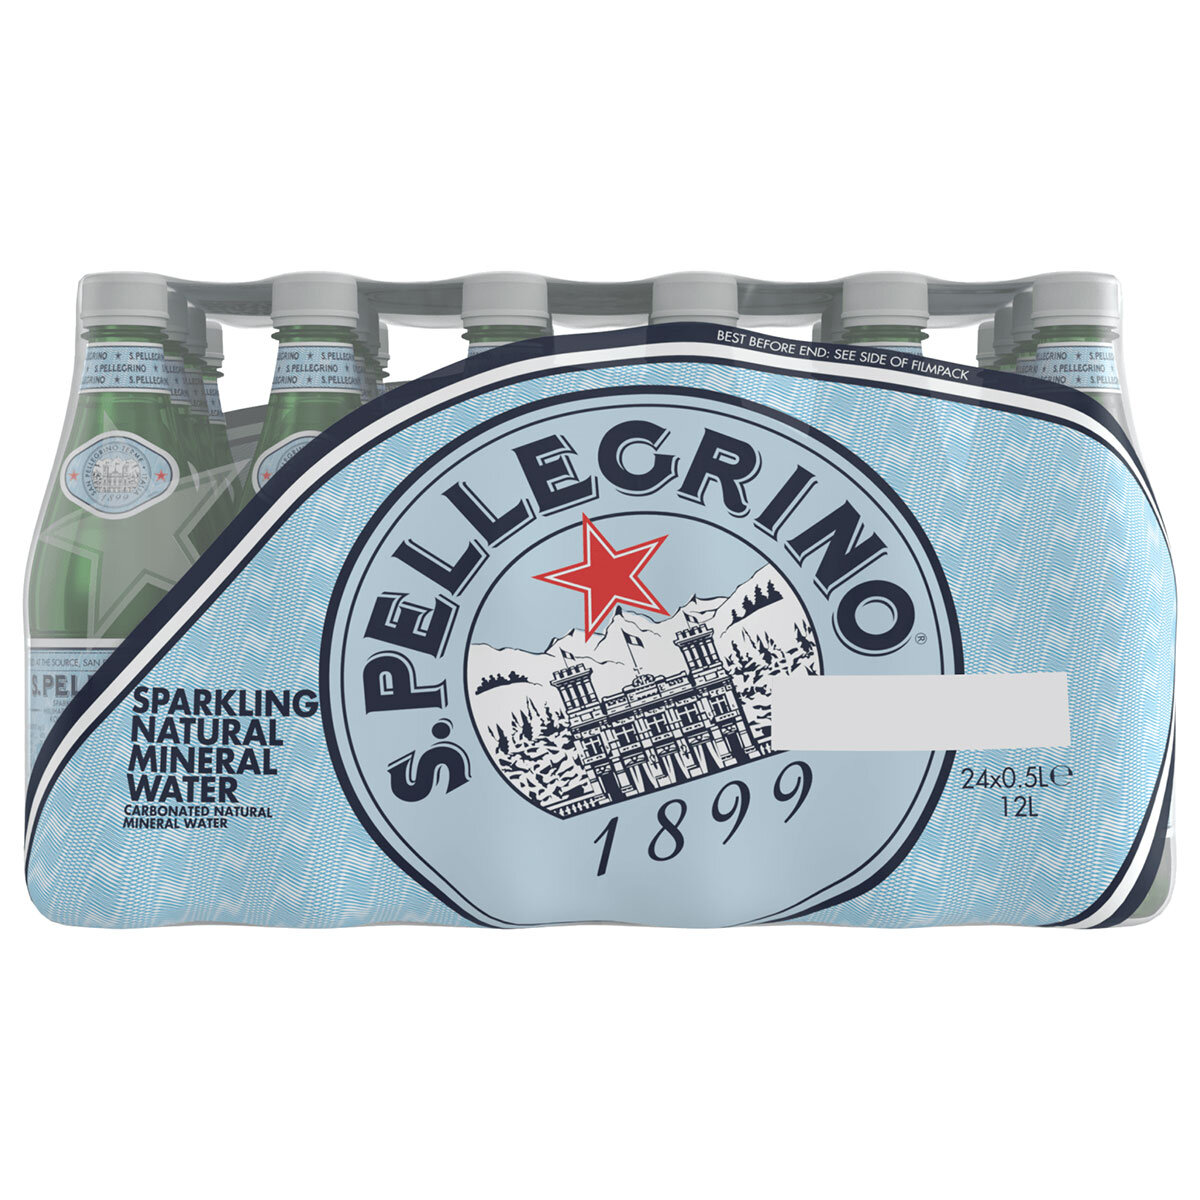 San Pellegrino Water: A Symbol of Italy in Movies & Books